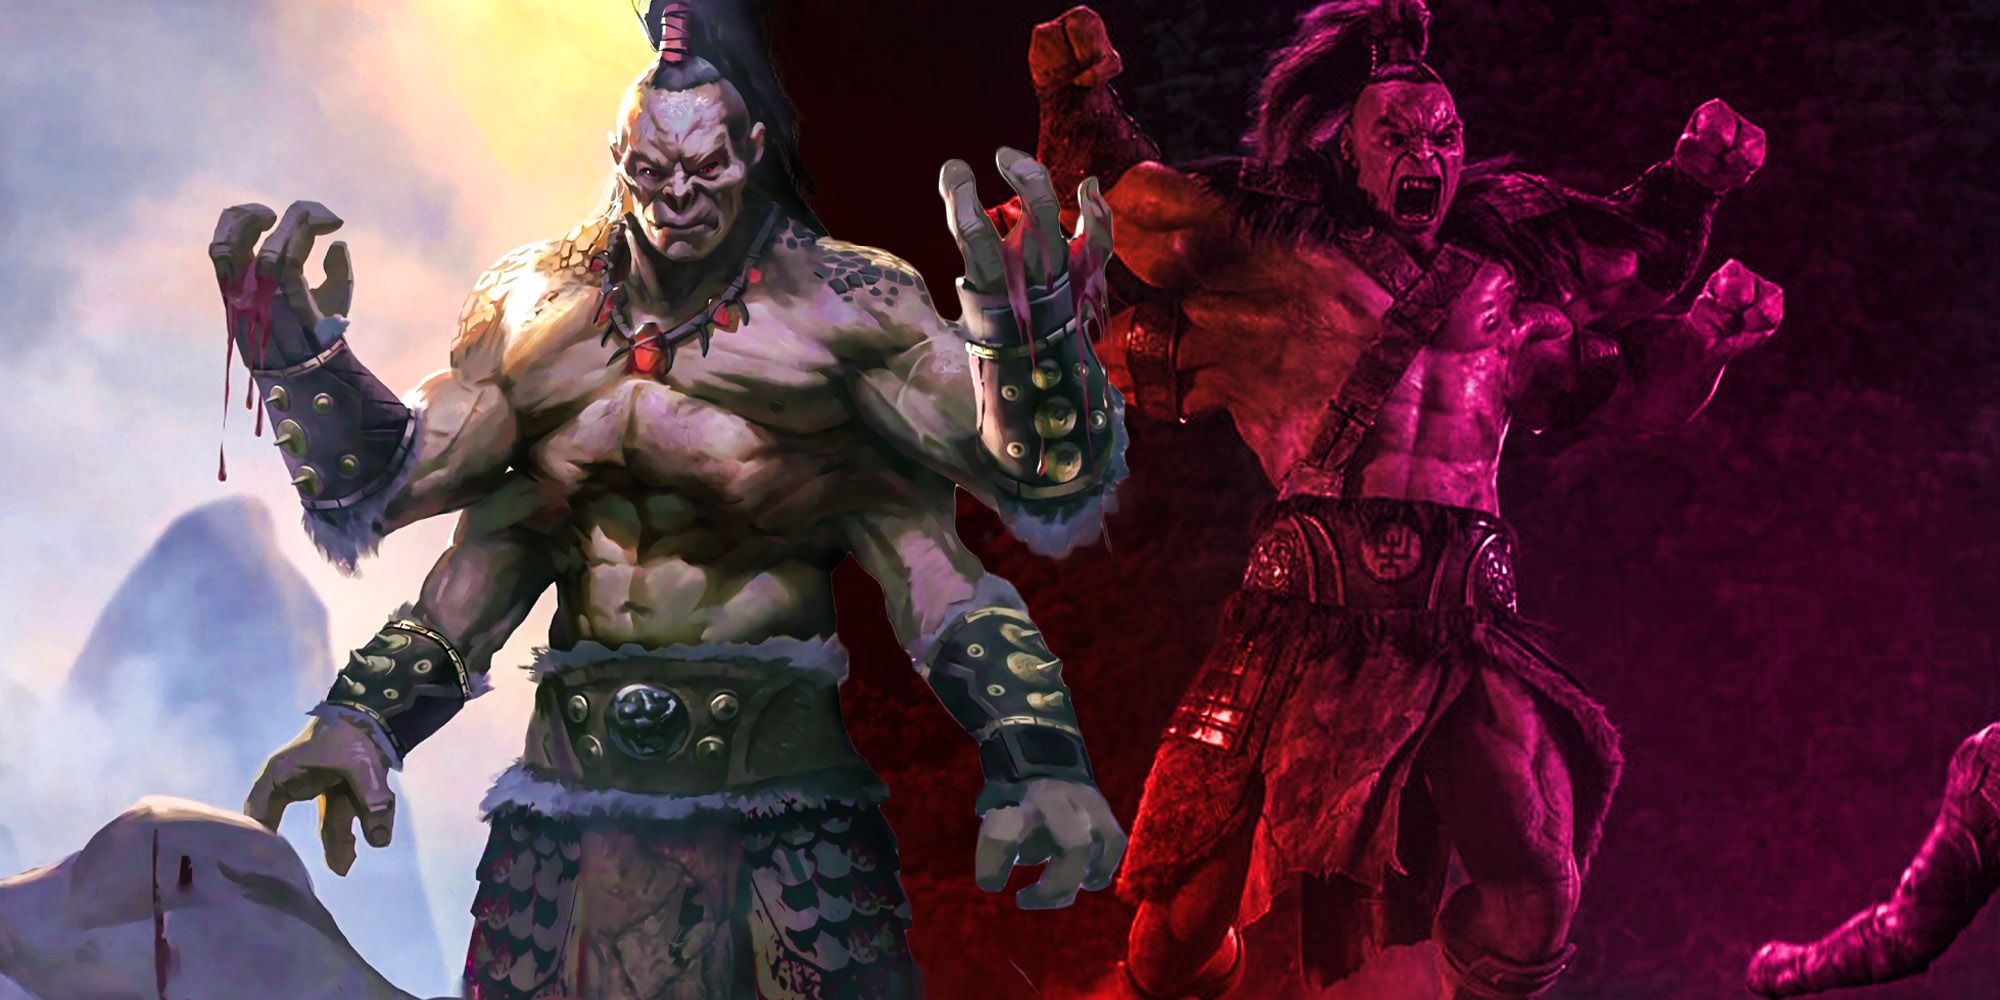 What do you think of Goro's design in the 2021 Mortal Kombat movie